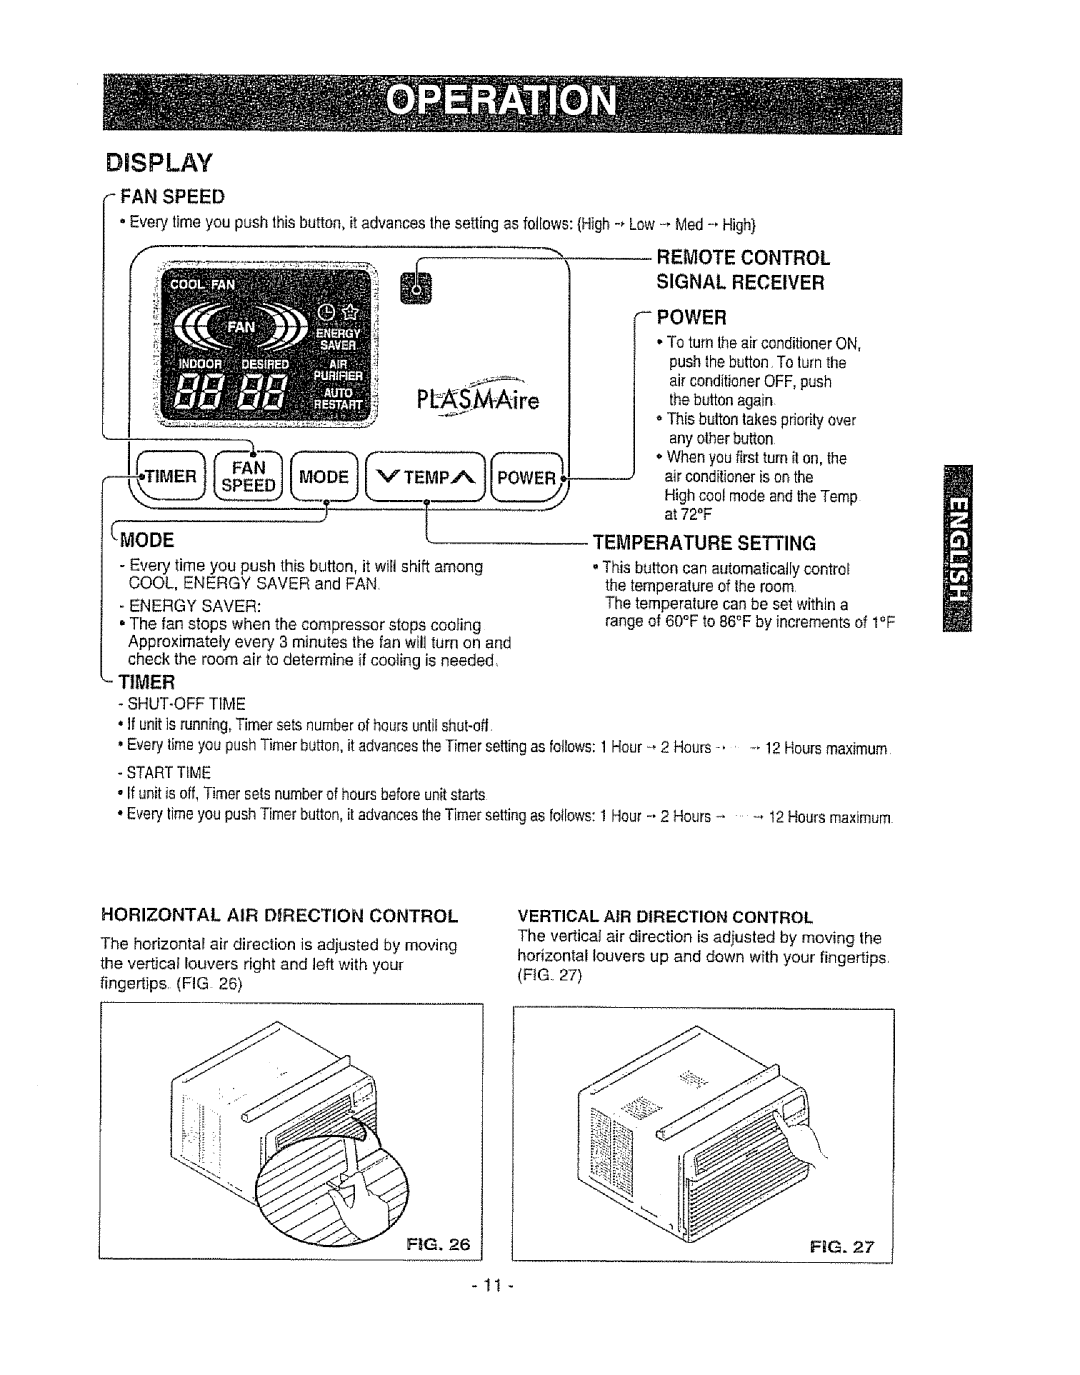 Kenmore 580. 72089 owner manual Display, PbASMAire, Fan Speed, Mode, r__-_-;_, Signal, Receiver, Power, Timer 